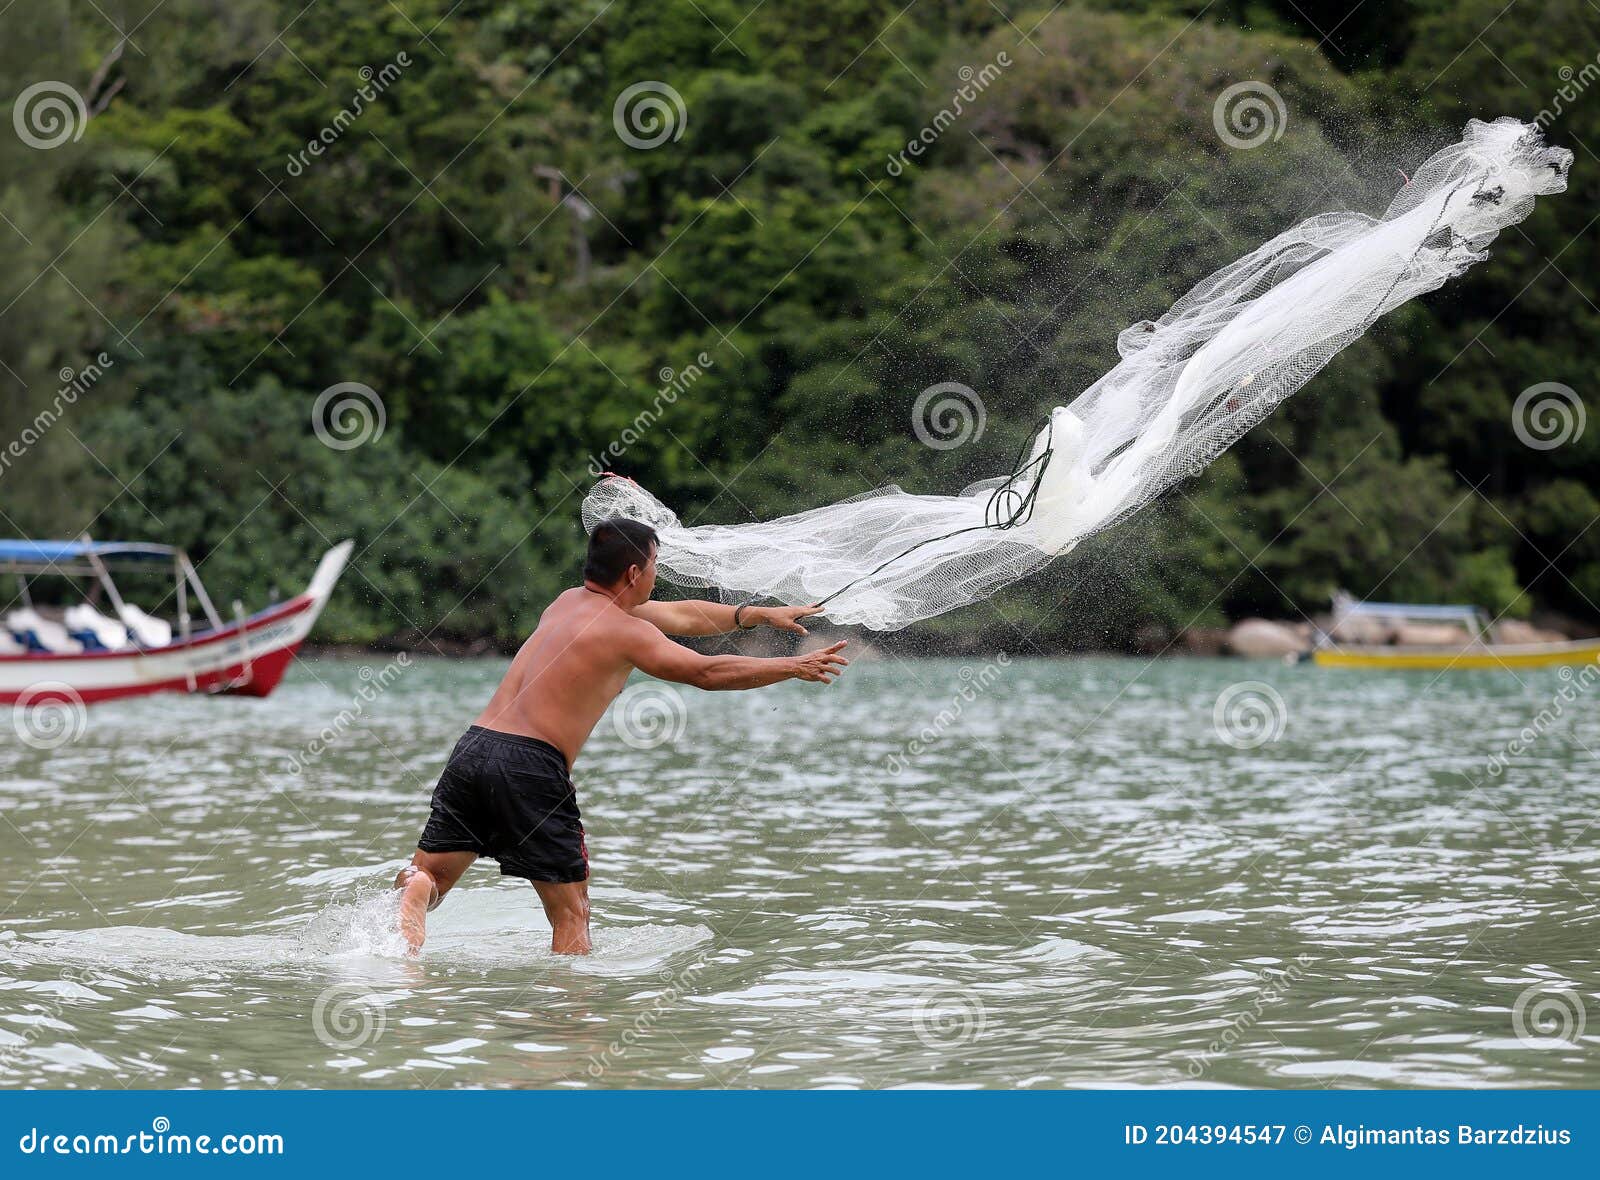 Fisher Man Throwing Fishing Net for Catching Fish for Food